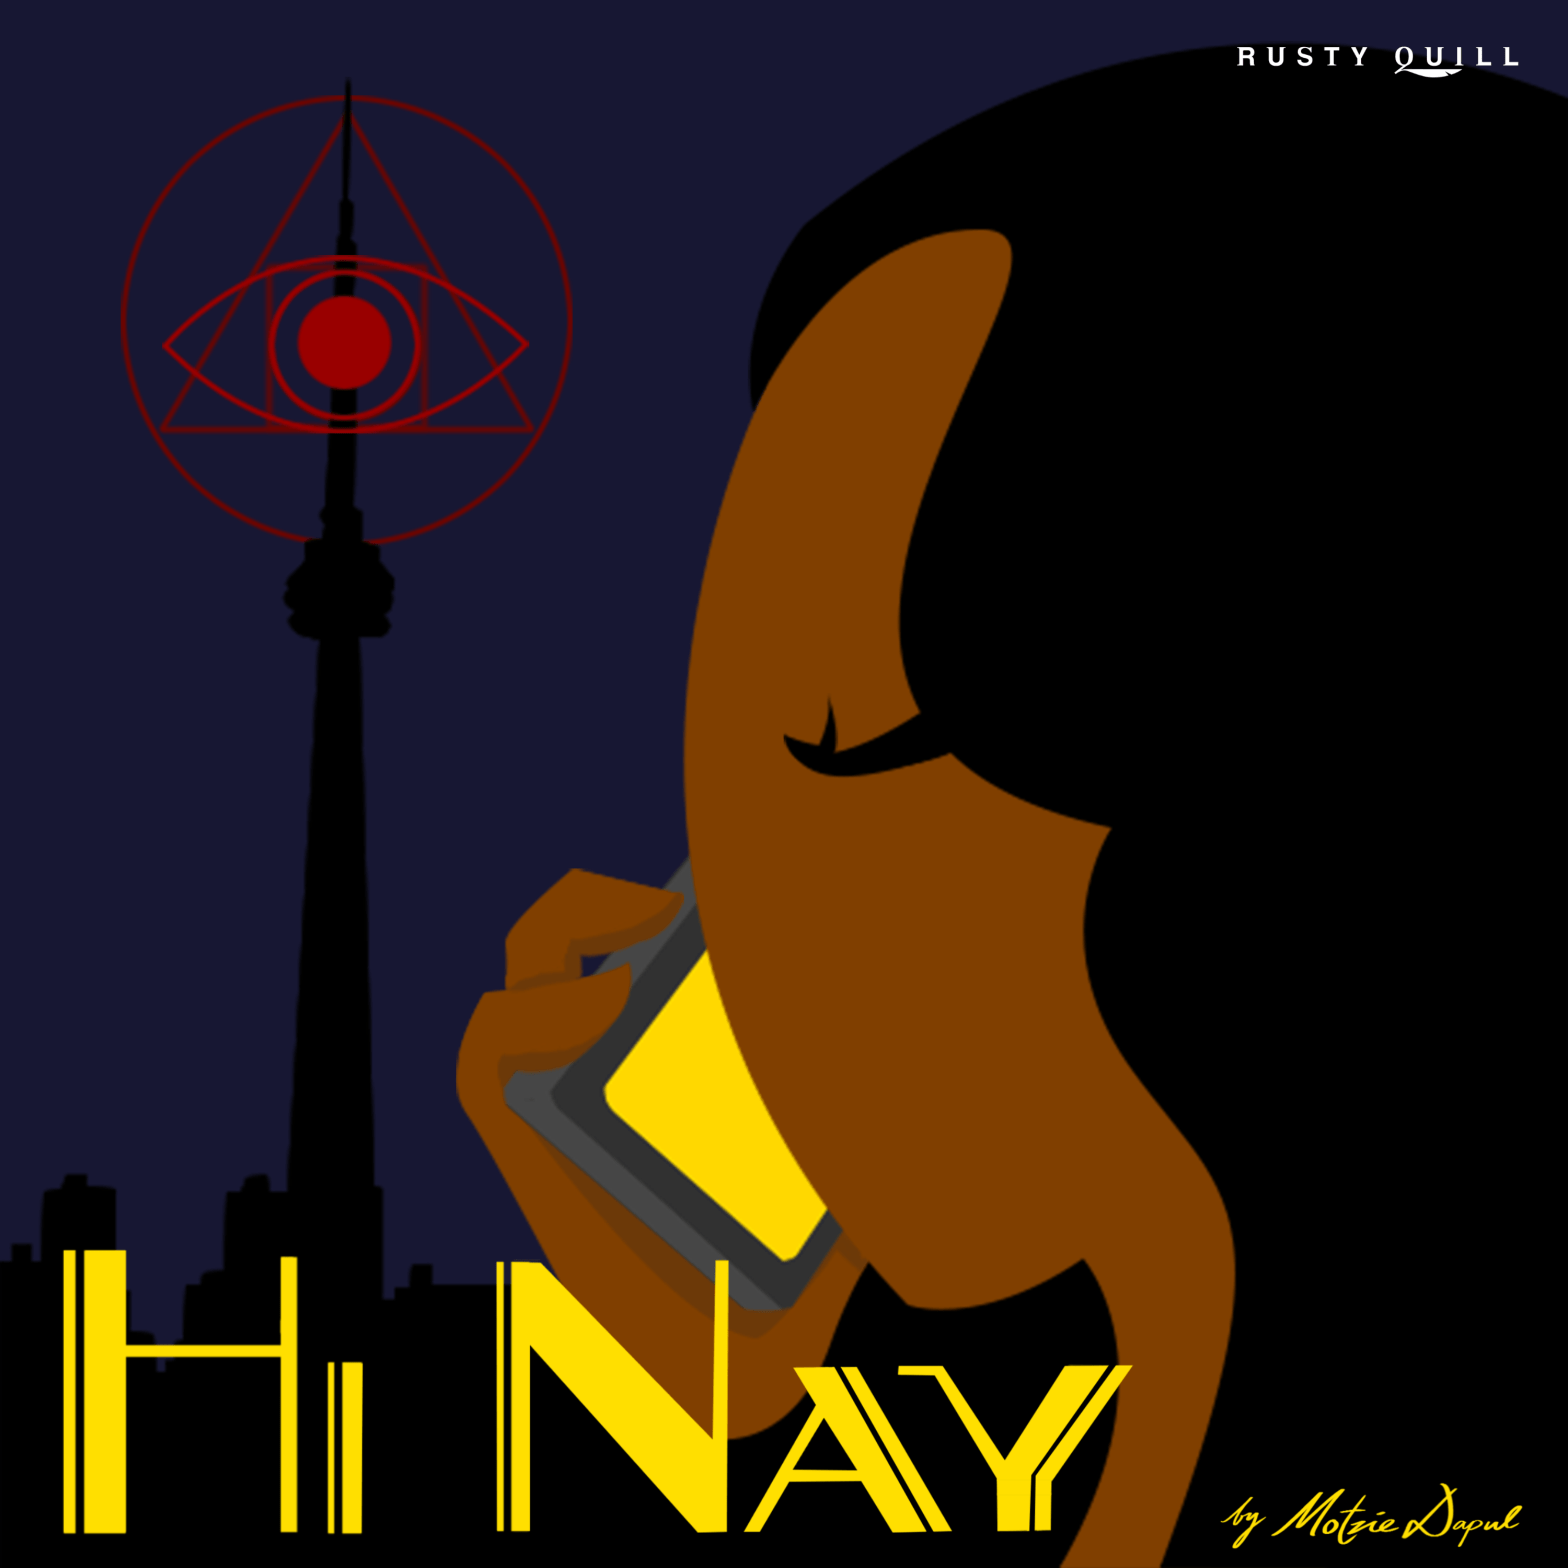 Hi Nay Cover Art, consisting of a dark blue background with a black silhouetted city scape with what could be a communications tower in Toronto left side of the picture with a logo over the top of the tower the logo is all in red, consisting of a circle around a square, triangle and eye overlapping. On the right side is a stylised head and hair of a lady on a mobile phone looking towards left of the picture. The show name “Hi Nay” is written in large yellow font across the bottom left of the image, bottom right in small yellow writing like a signature is written “by Motzie Dapul”, top right of the image is the Rusty Quill logo in White.